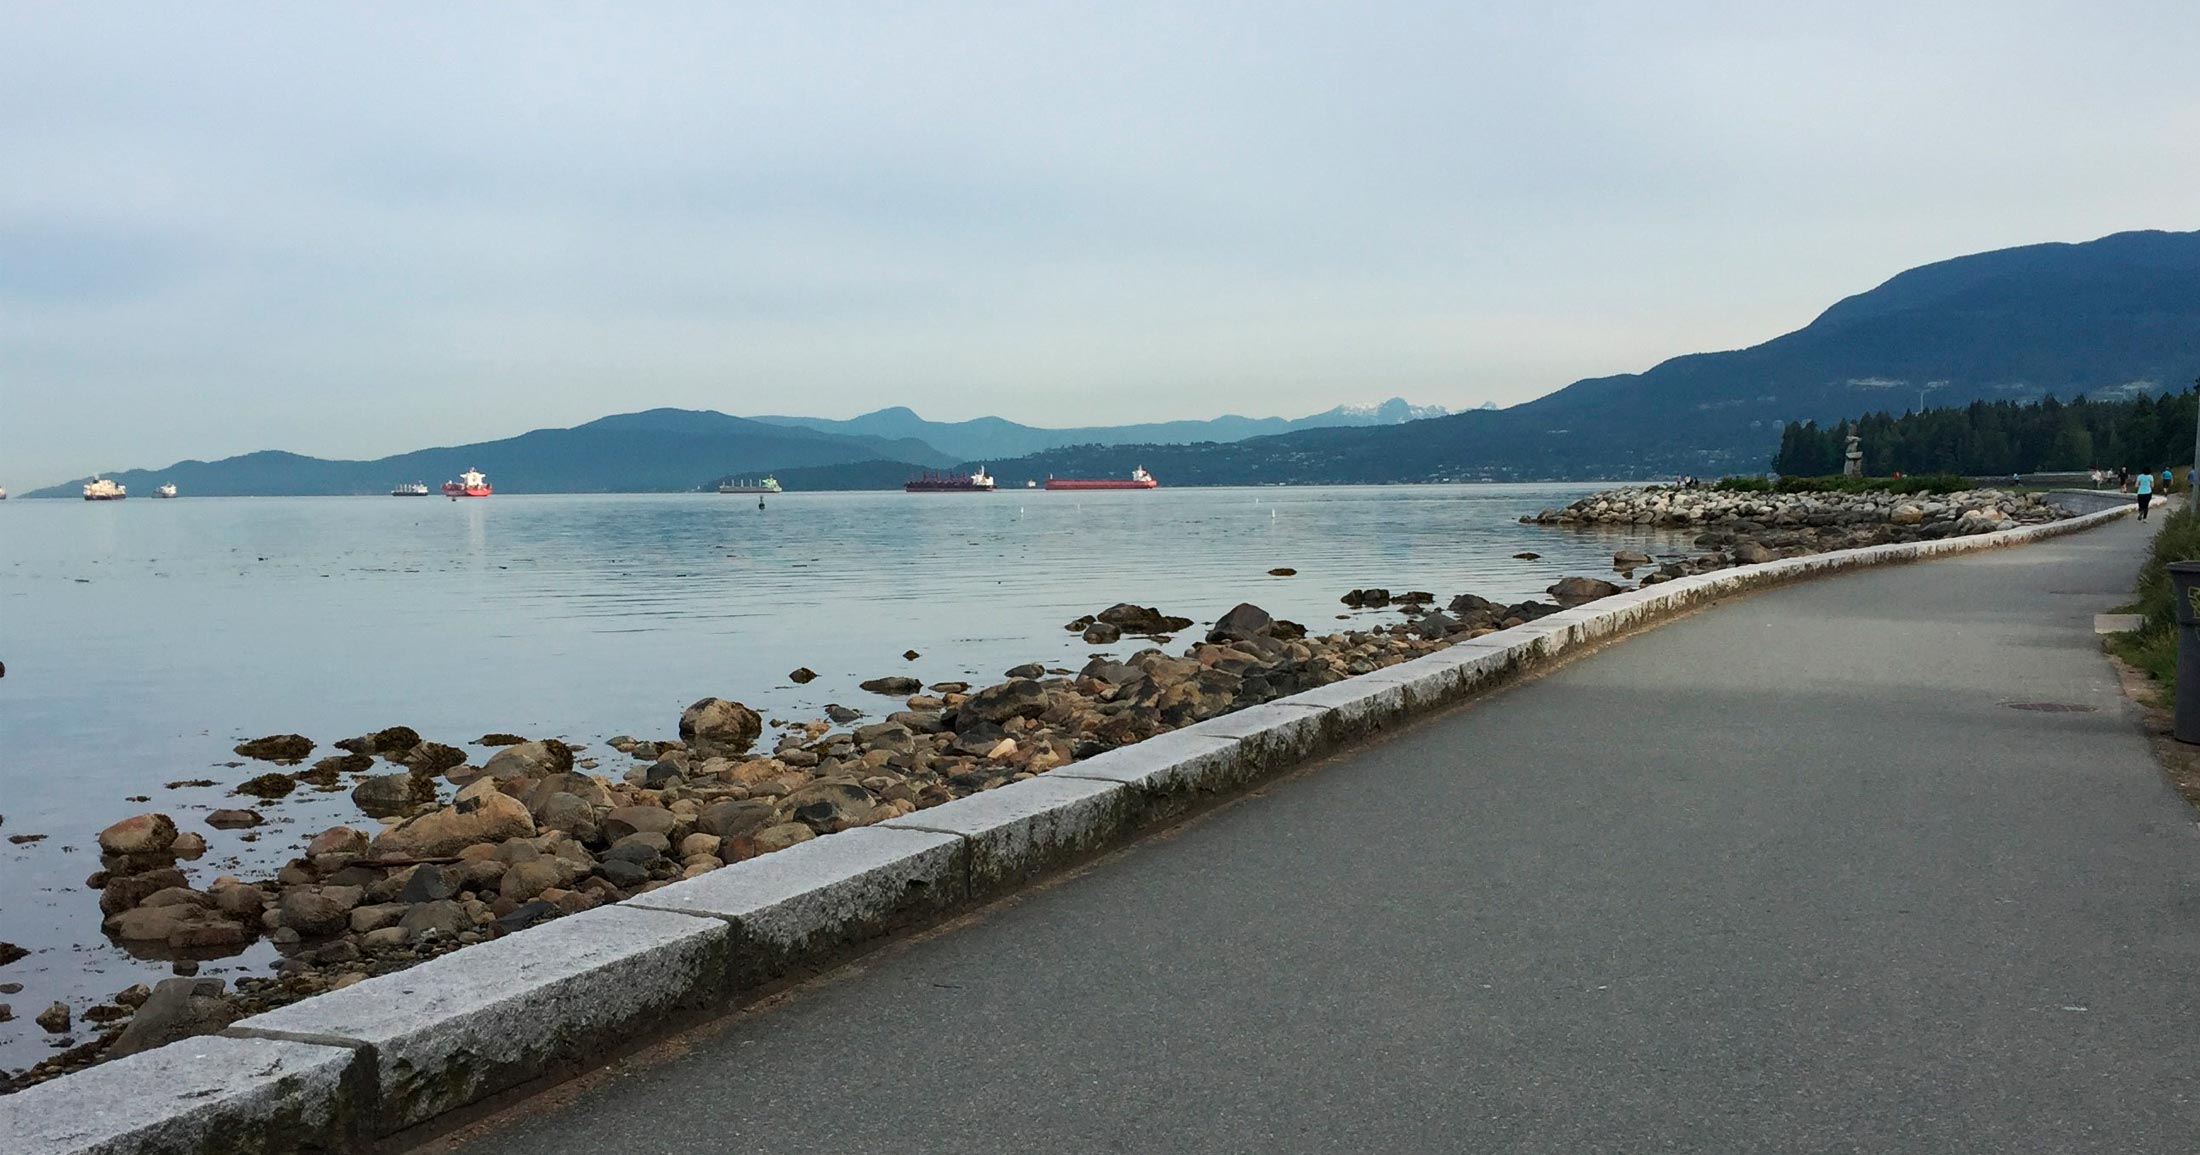 A pathway runs along the waters of the Vancouver coastline toward the mountains and grey clouded sky.